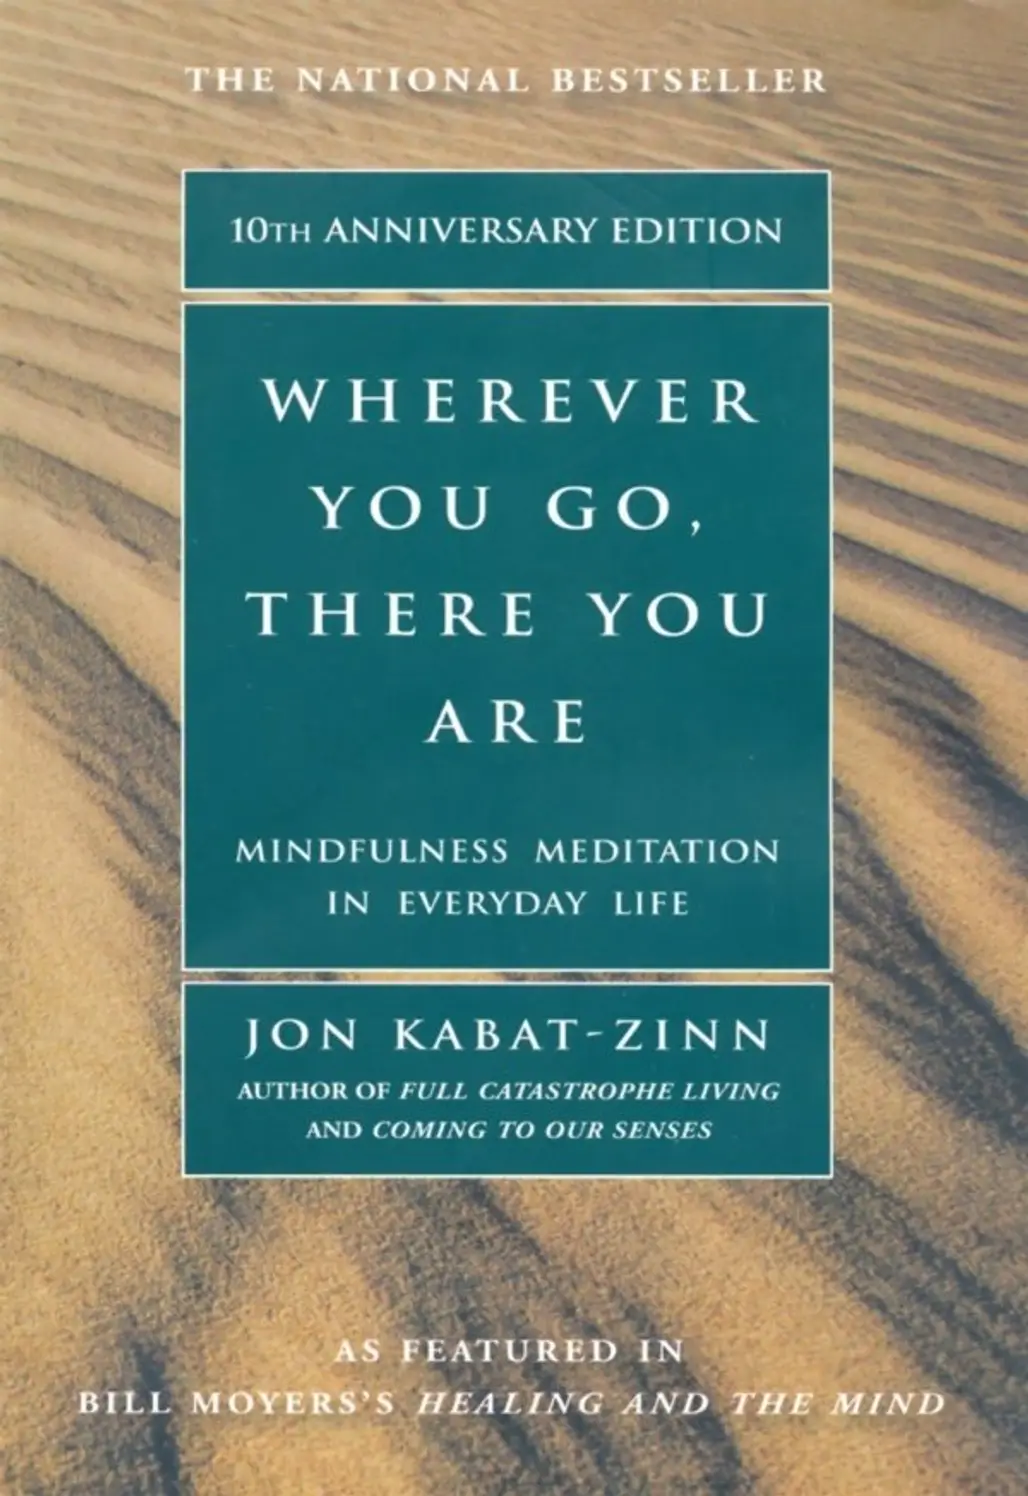 Wherever You Go There You Are by Jon Kabat-Zinn